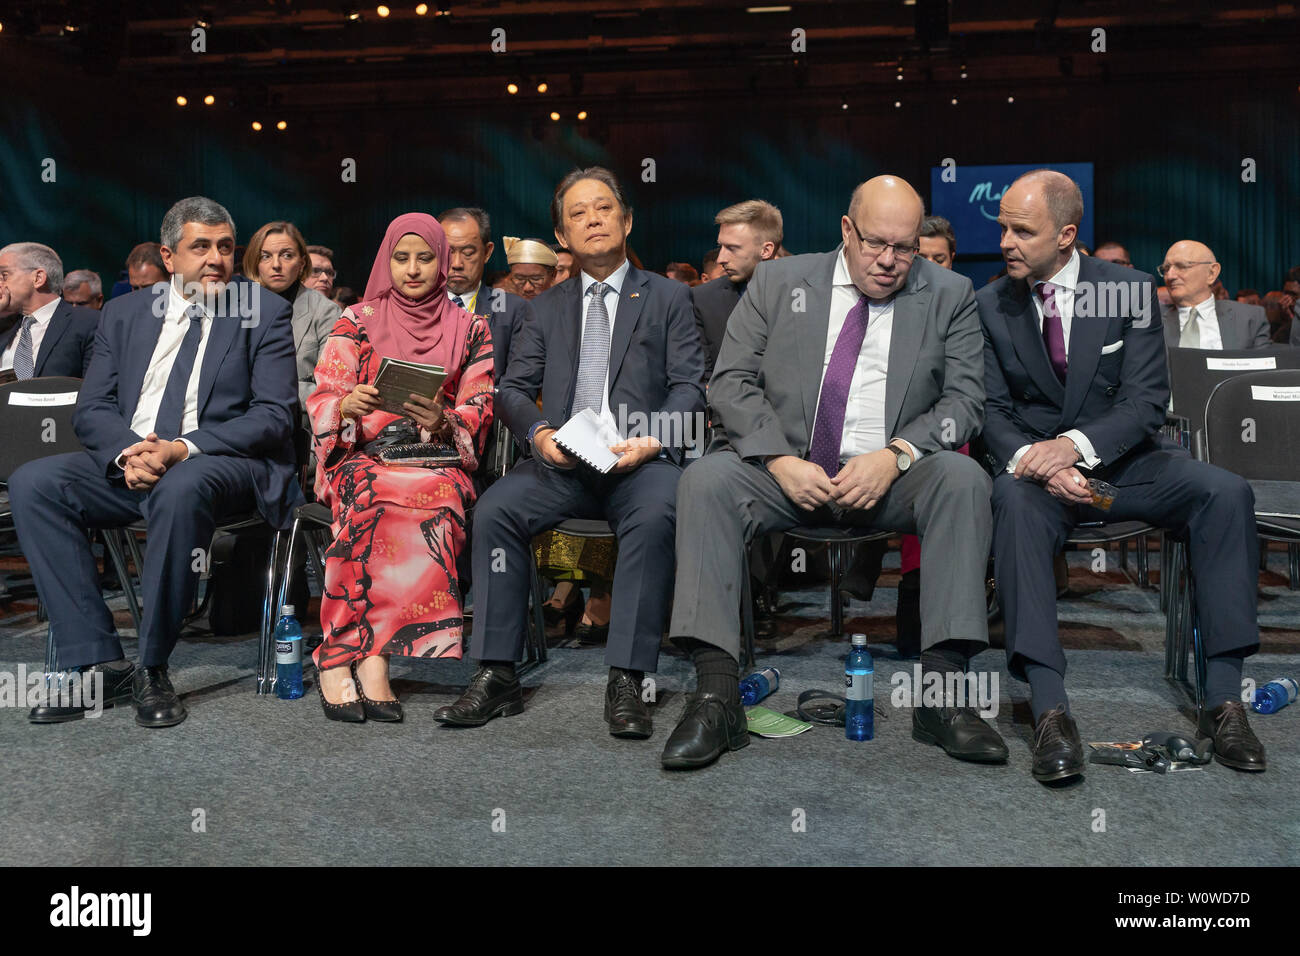 ITB Berlin 2019 - Opening Ceremony. Zurab Pololikashvili, Secretary General, World Tourism Organization (UNWTO), S.E. Datuk Mohamaddin bin Ketapi, Minister of Tourism, Arts and Culture, Malaysia, Peter Altmaier, Federal Minister of Economics and Energy, Dr. Ing. Christian Göke, Chairman of the Management of Messe Berlin (from l.n.r.) Stock Photo